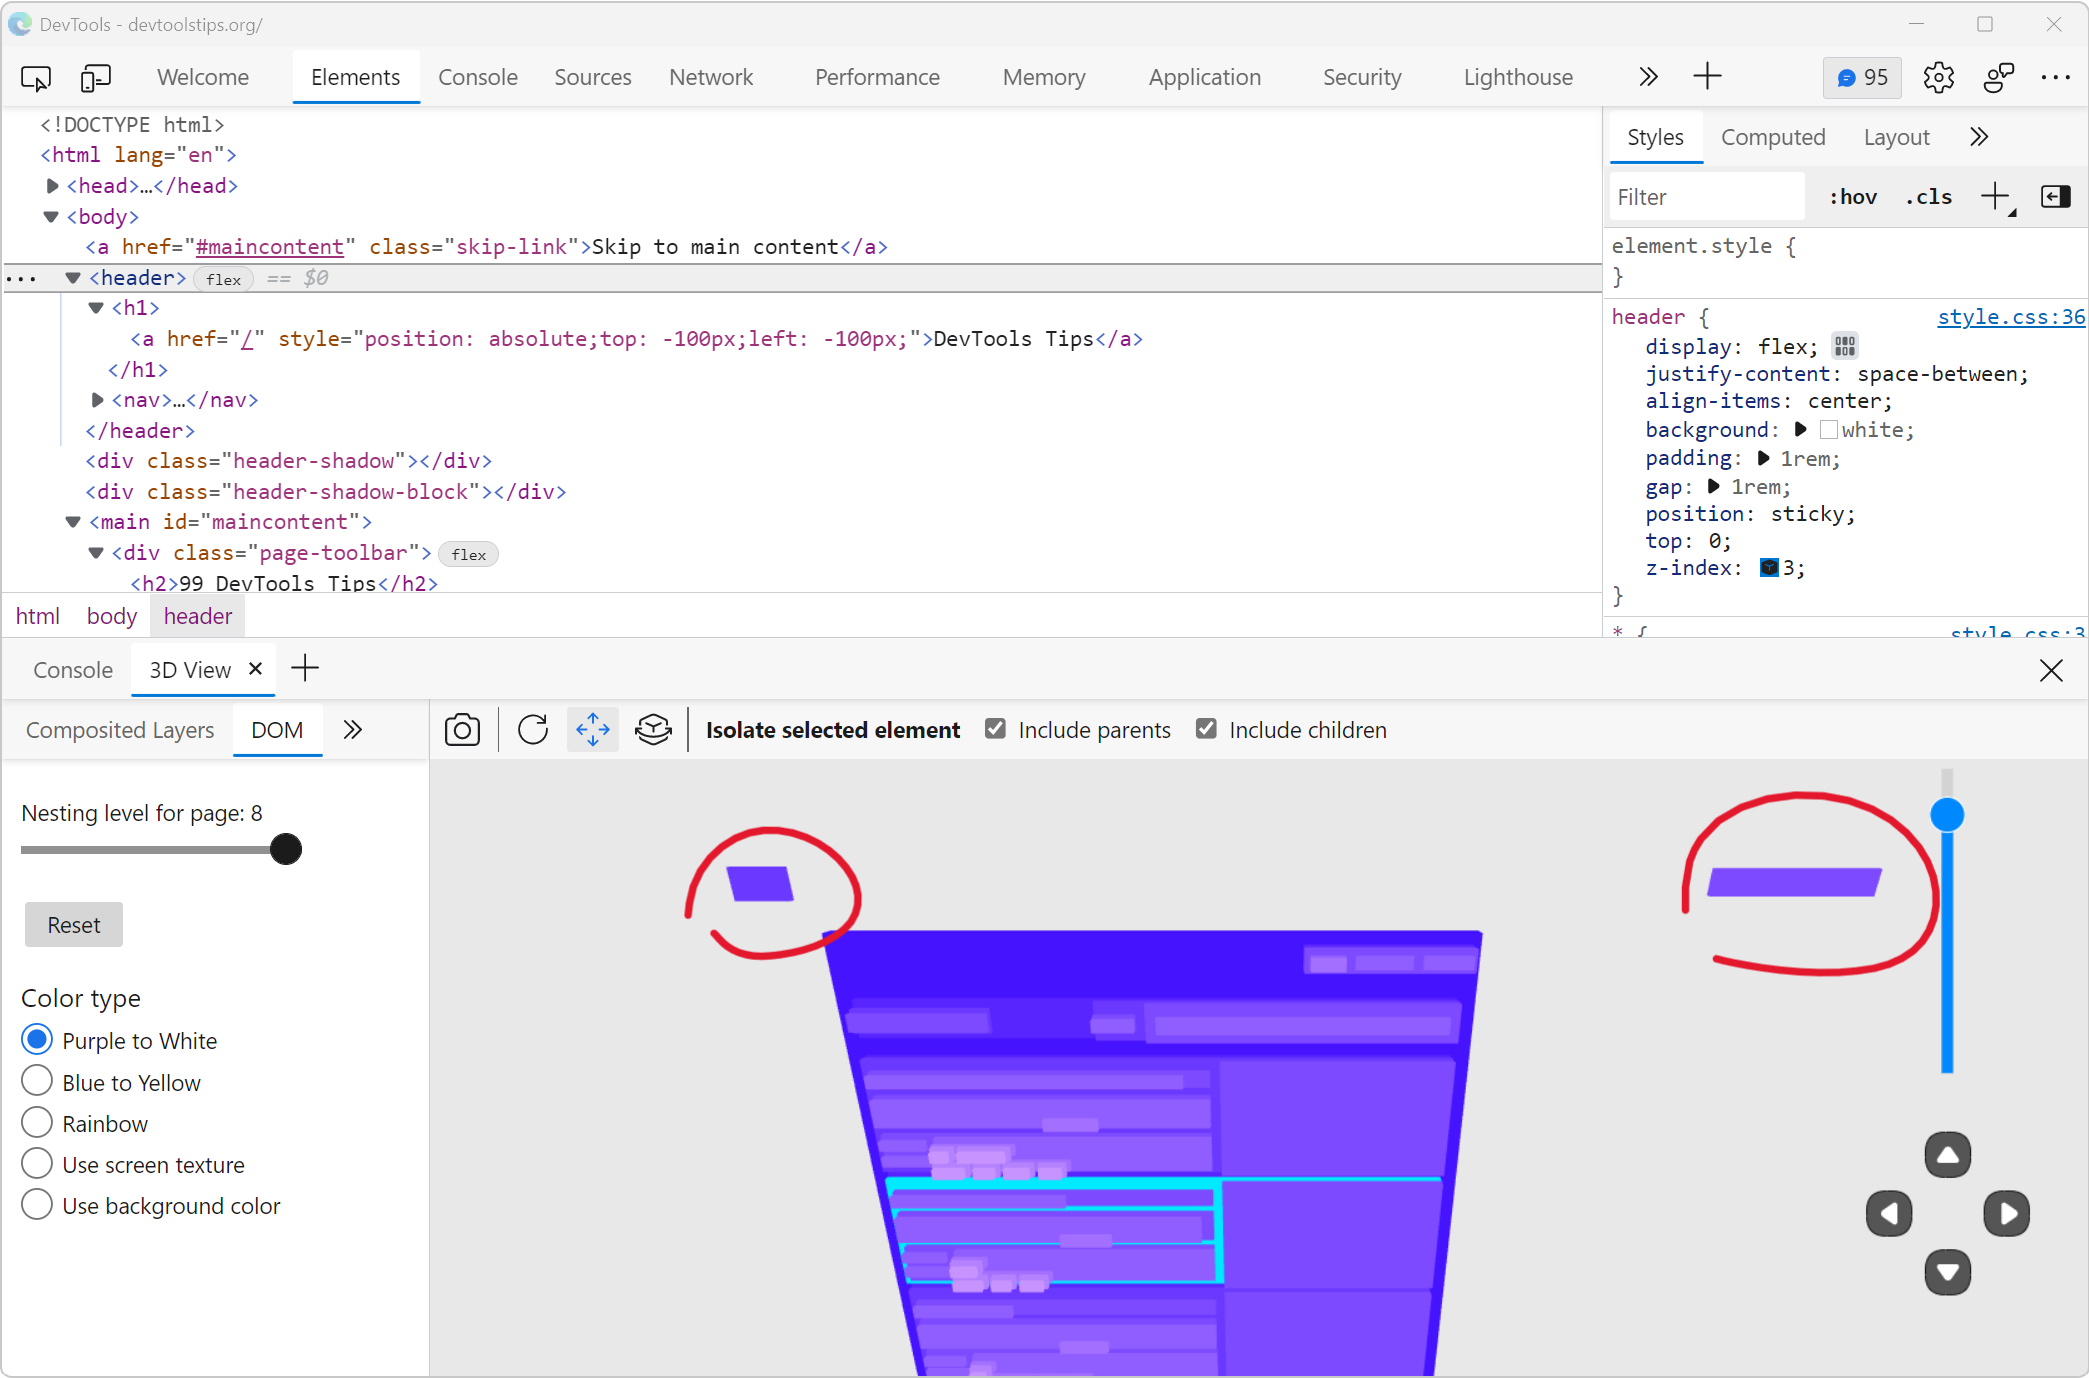 Edge DevTools showing the Elements tool at the top with the DOM tree and the 3D View tool at the bottom, showing a 3D render of the page, with most elements in the same rectangle, and 2 smaller elements outside of the main rectangle.